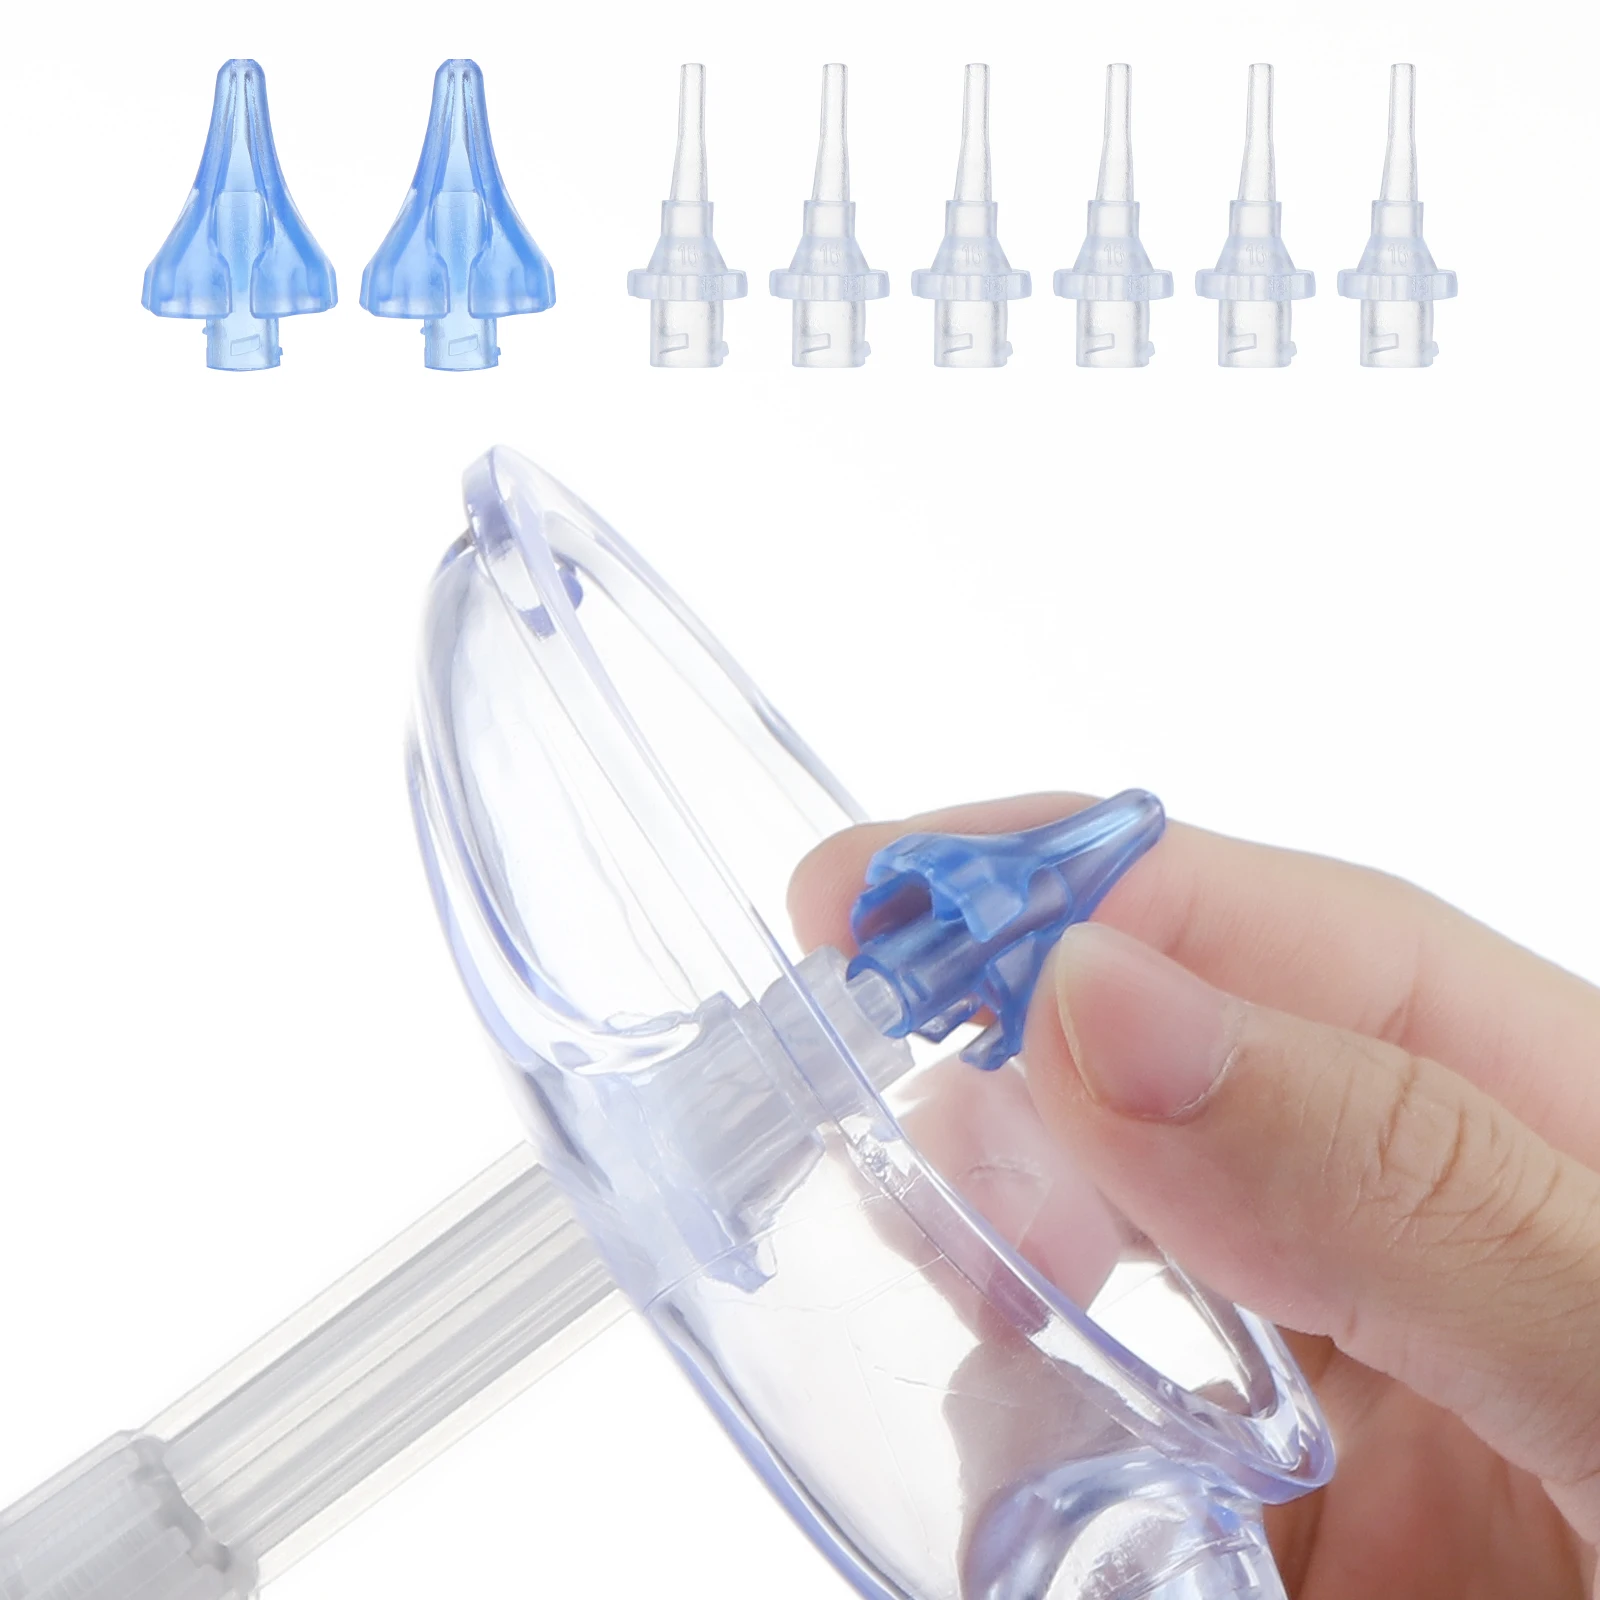 500ml Ear Wax Washing Kit Irrigation Water Washing Syringe Squeeze Bulb Ear Cleaner Set Plastic Ear Wax Removal Tool Adults Kids images - 6